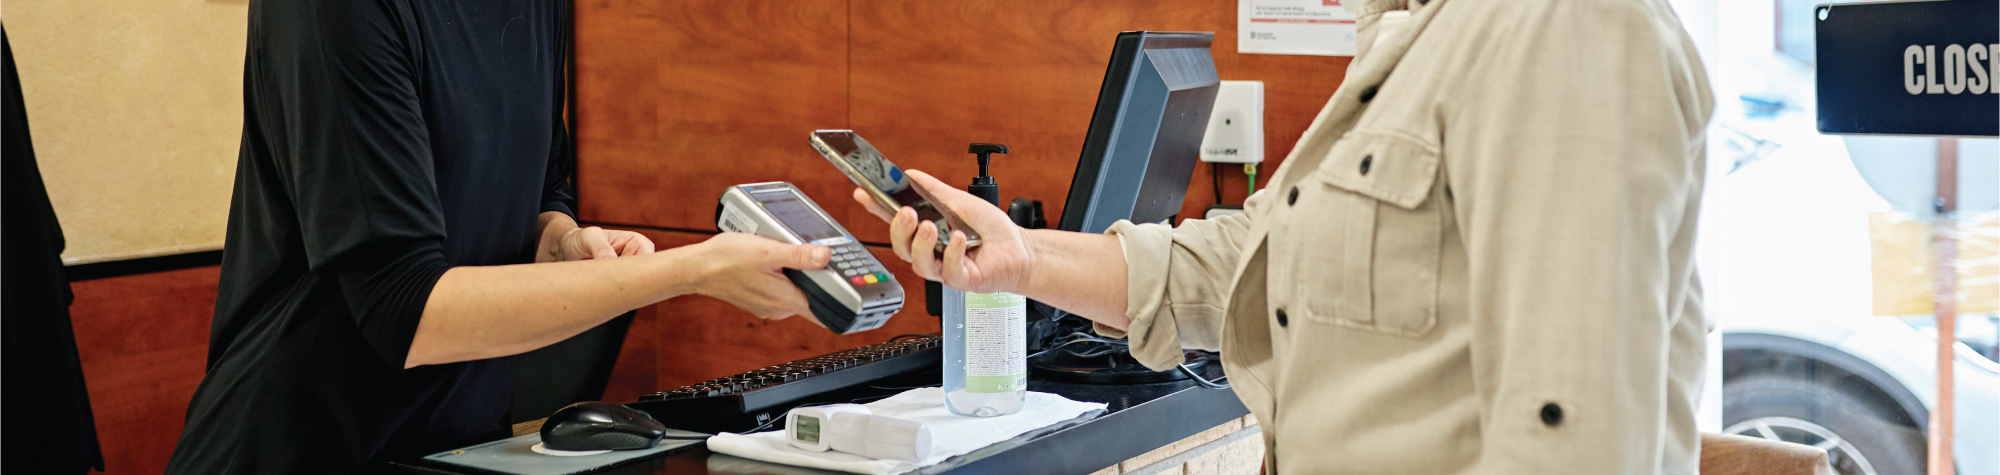 Should Your Business Accept Mobile Payments?